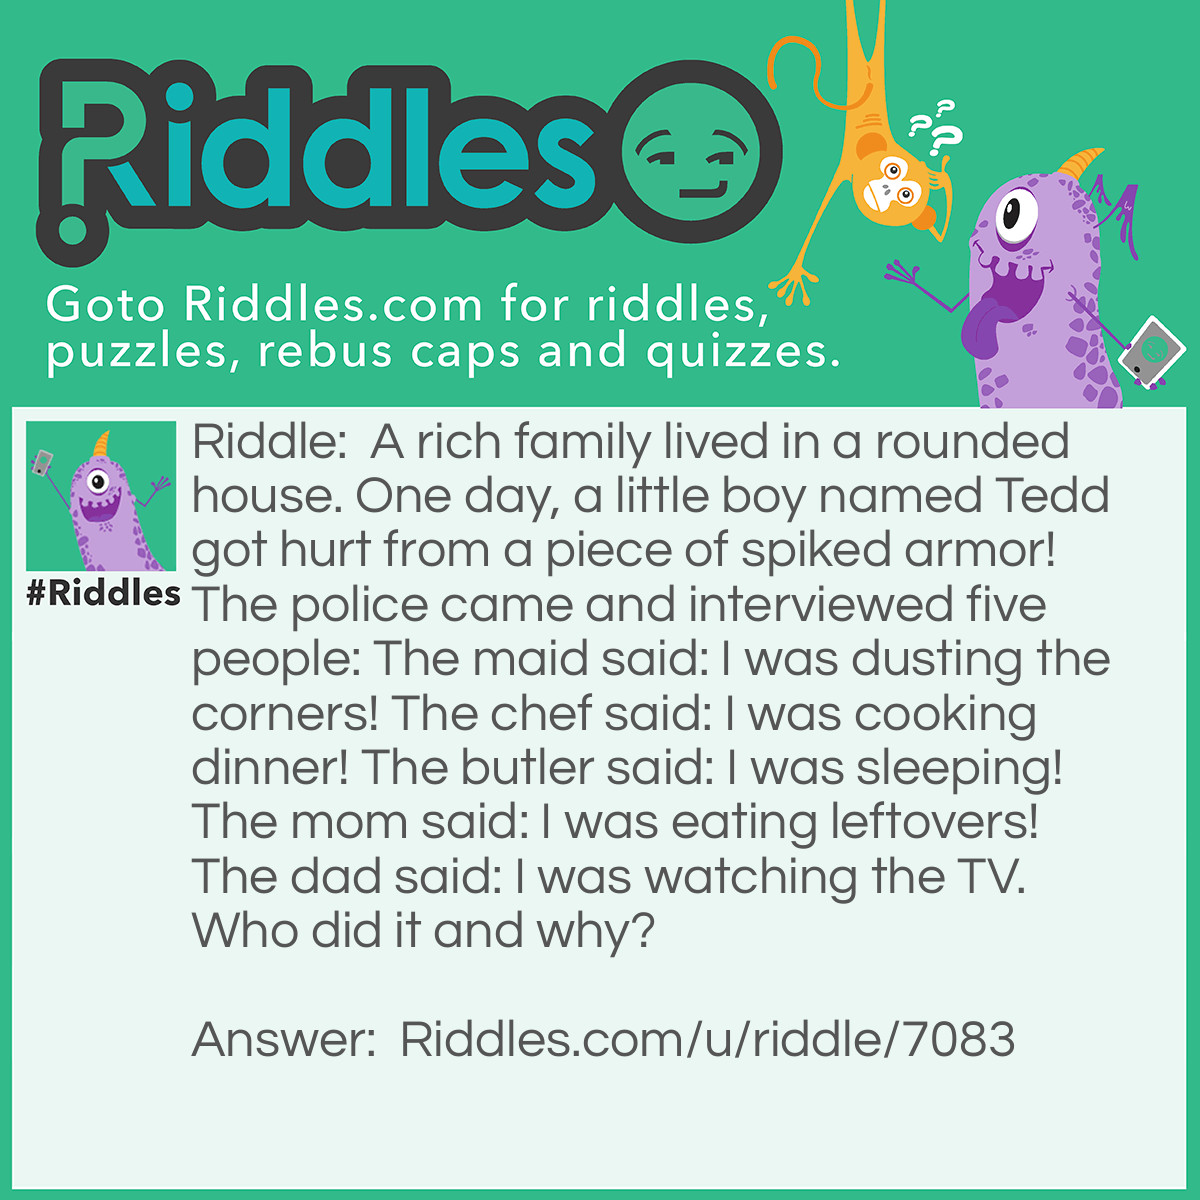 Riddle: A rich family lived in a rounded house. One day, a little boy named Tedd got hurt from a piece of spiked armor! The police came and interviewed five people: The maid said: I was dusting the corners! The chef said: I was cooking dinner! The butler said: I was sleeping! The mom said: I was eating leftovers! The dad said: I was watching the TV. Who did it and why? Answer: The maid because it was a rounded house.